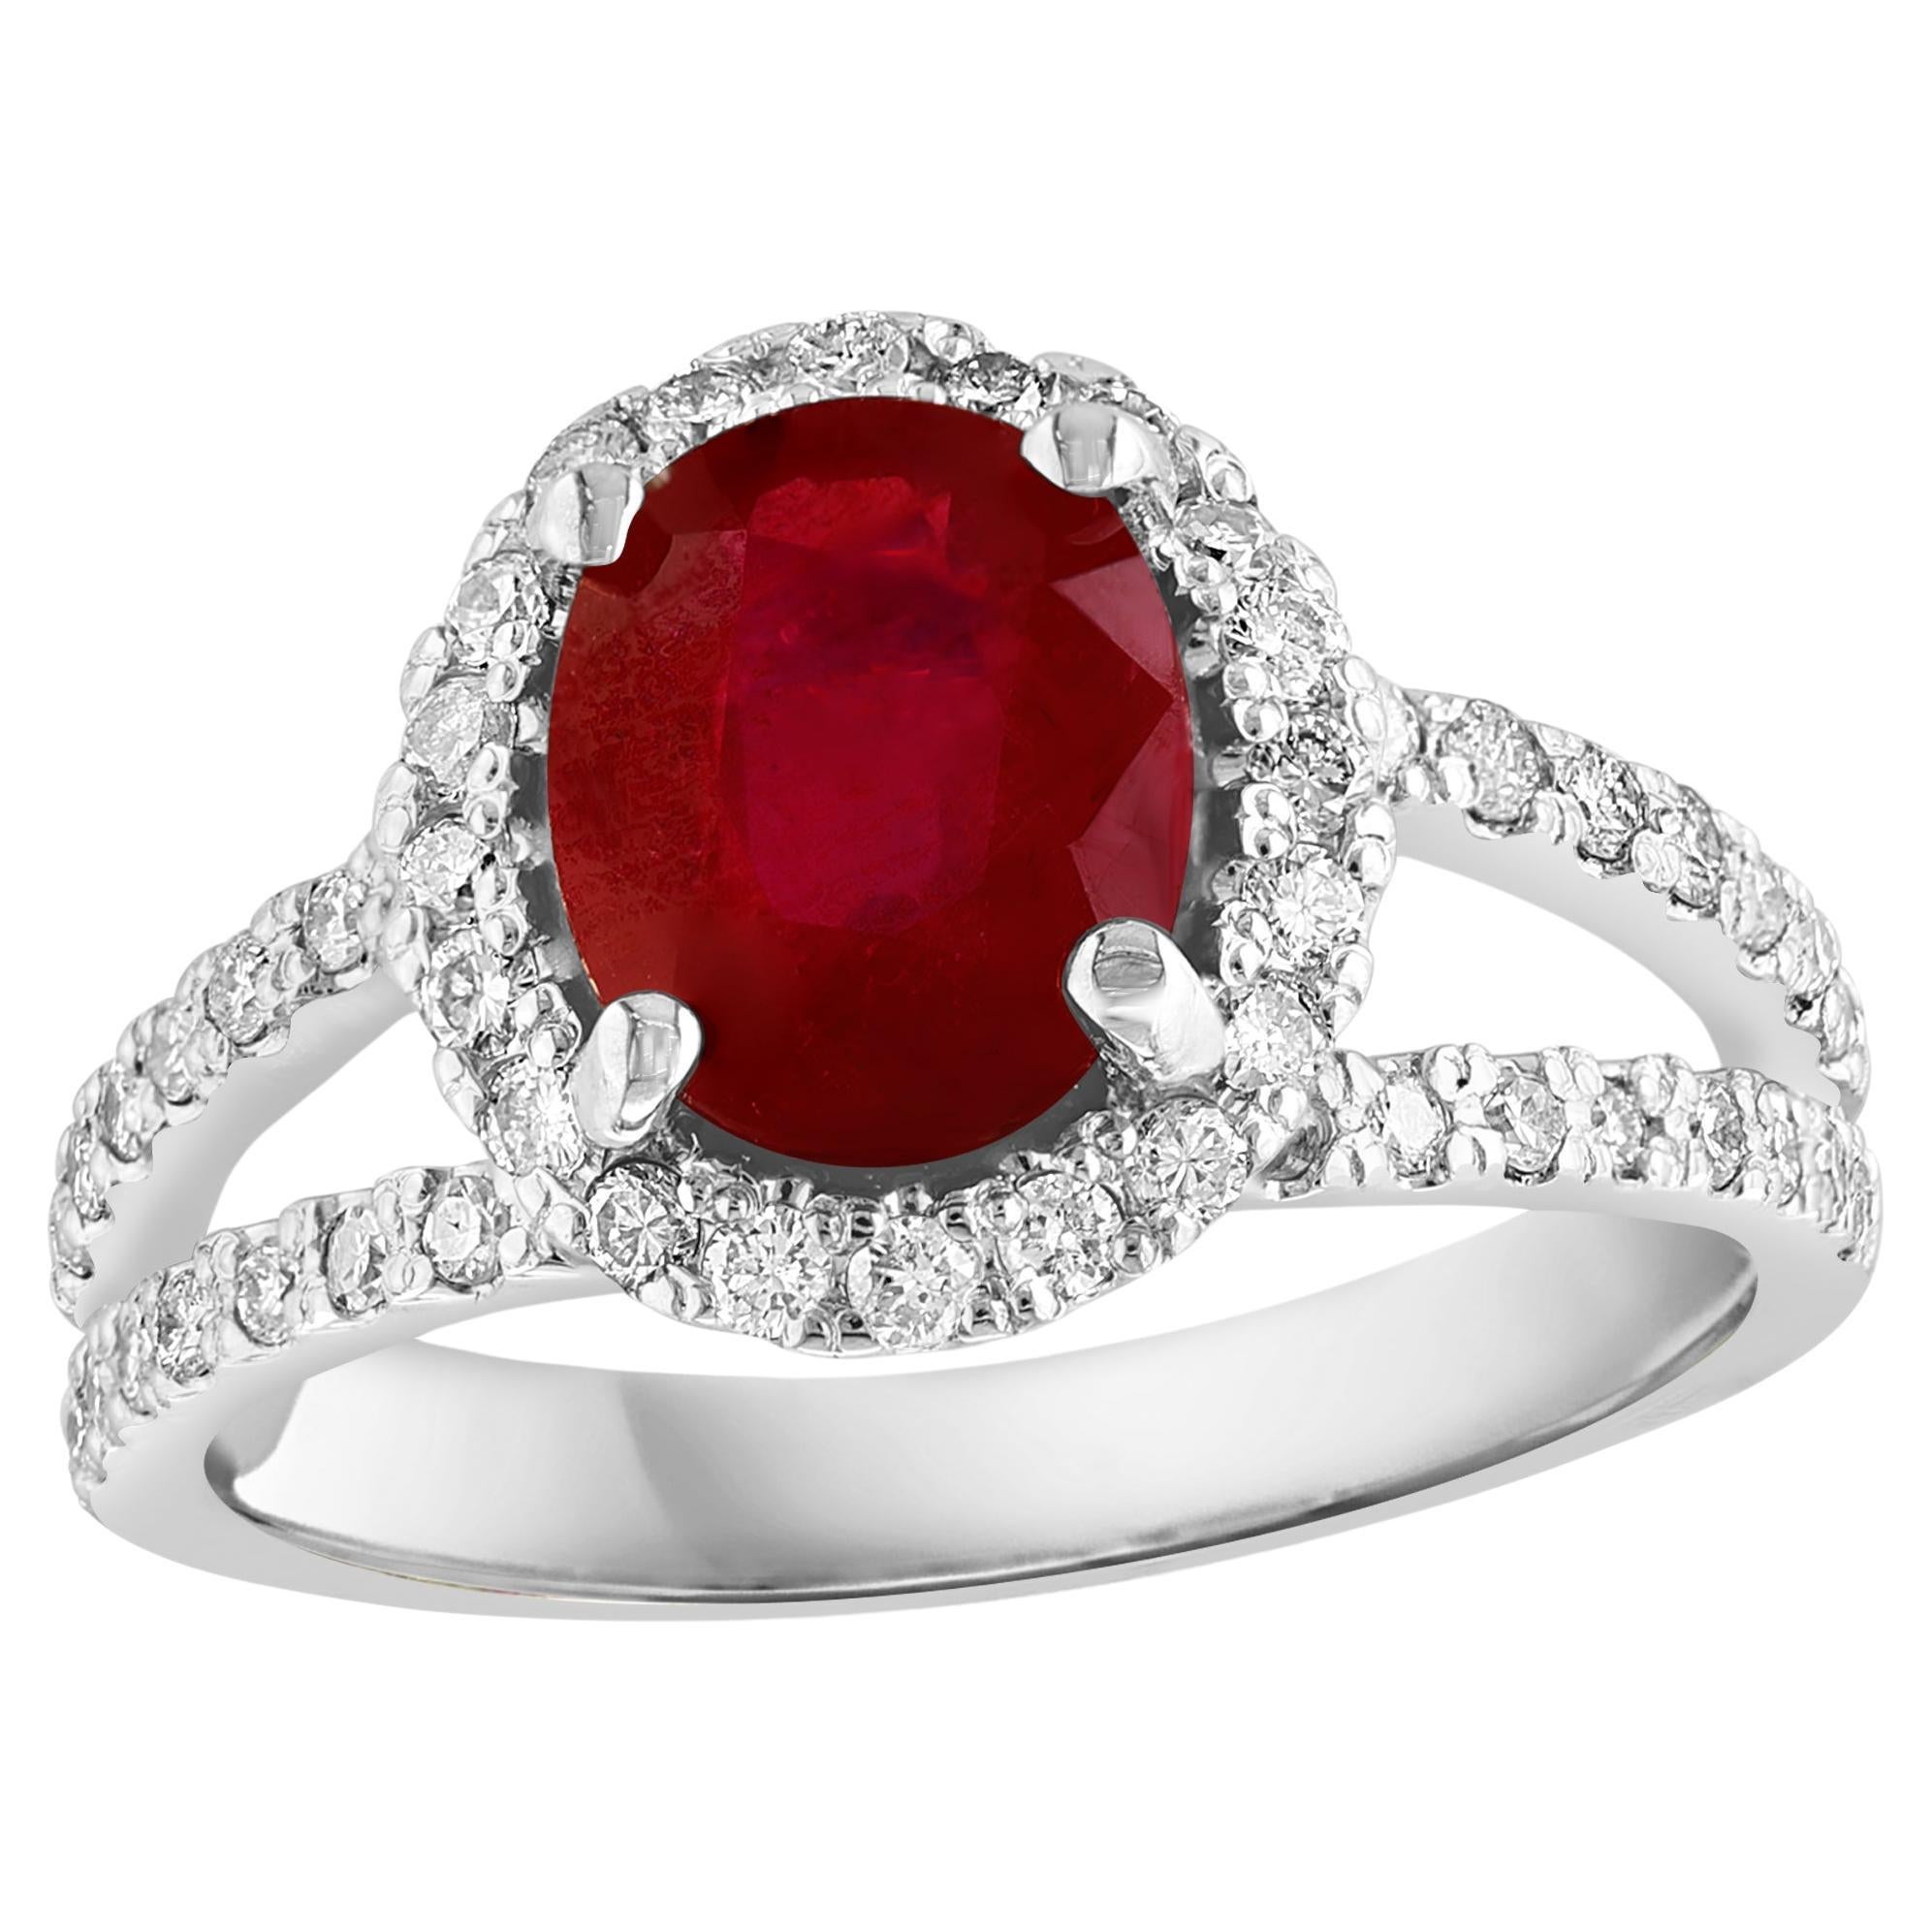 2.5 Carat Oval Treated Ruby & 2 ct Diamond Ring 14 Karat White Gold Size 7 For Sale